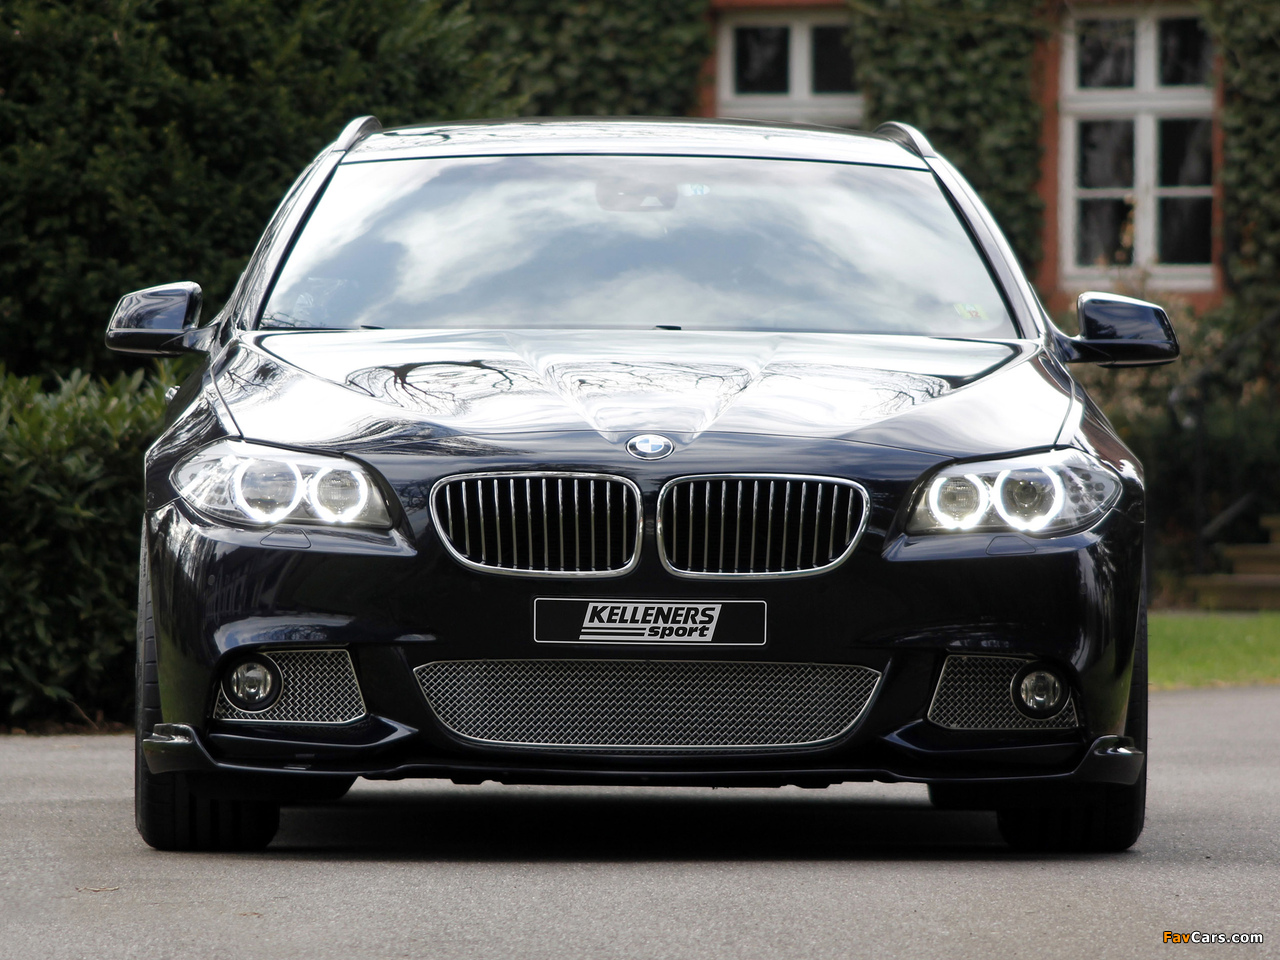 Images of Kelleners Sport BMW 5 Series Touring (F11) 2012 (1280 x 960)